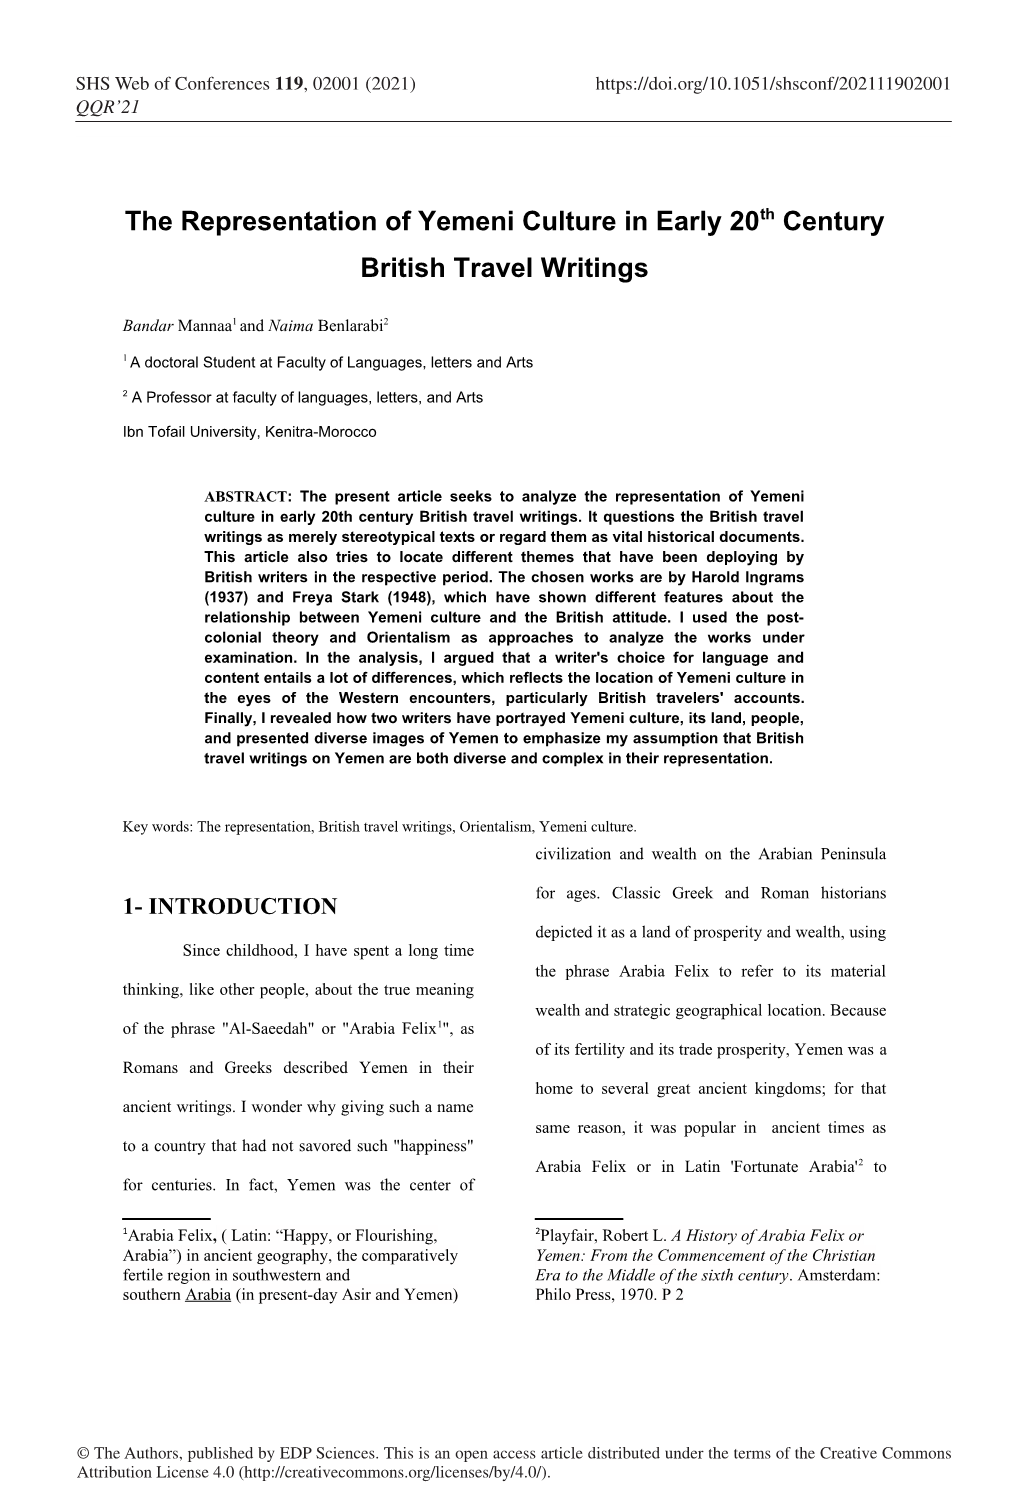 The Representation of Yemeni Culture in Early 20Th Century British Travel Writings